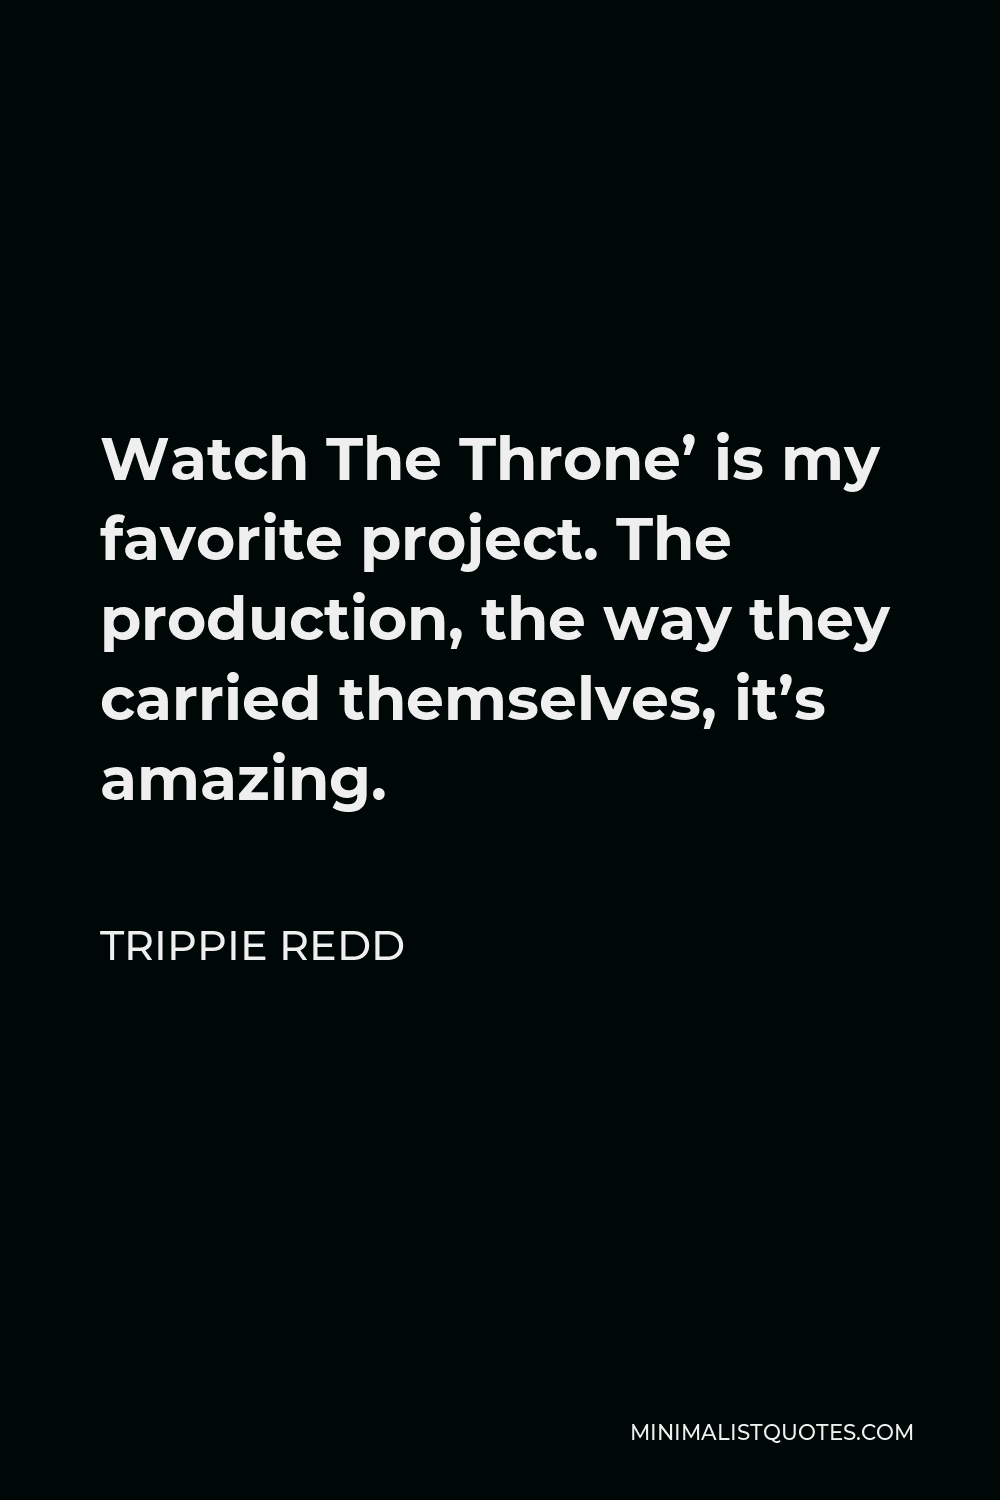 Trippie Redd Quote - Watch The Throne’ is my favorite project. The production, the way they carried themselves, it’s amazing.